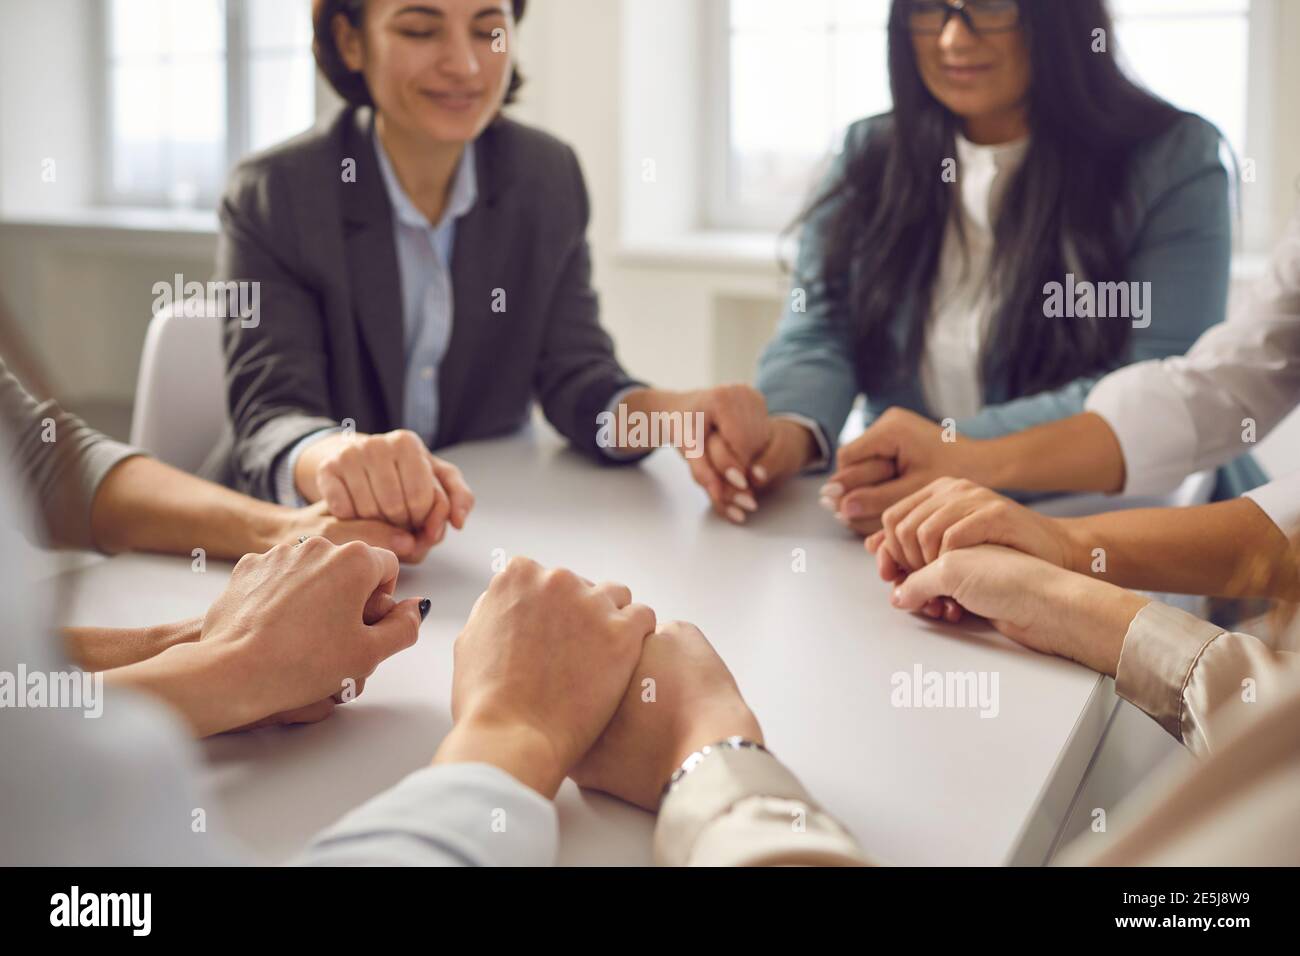 Teamwork, cooperation, business support concept Stock Photo